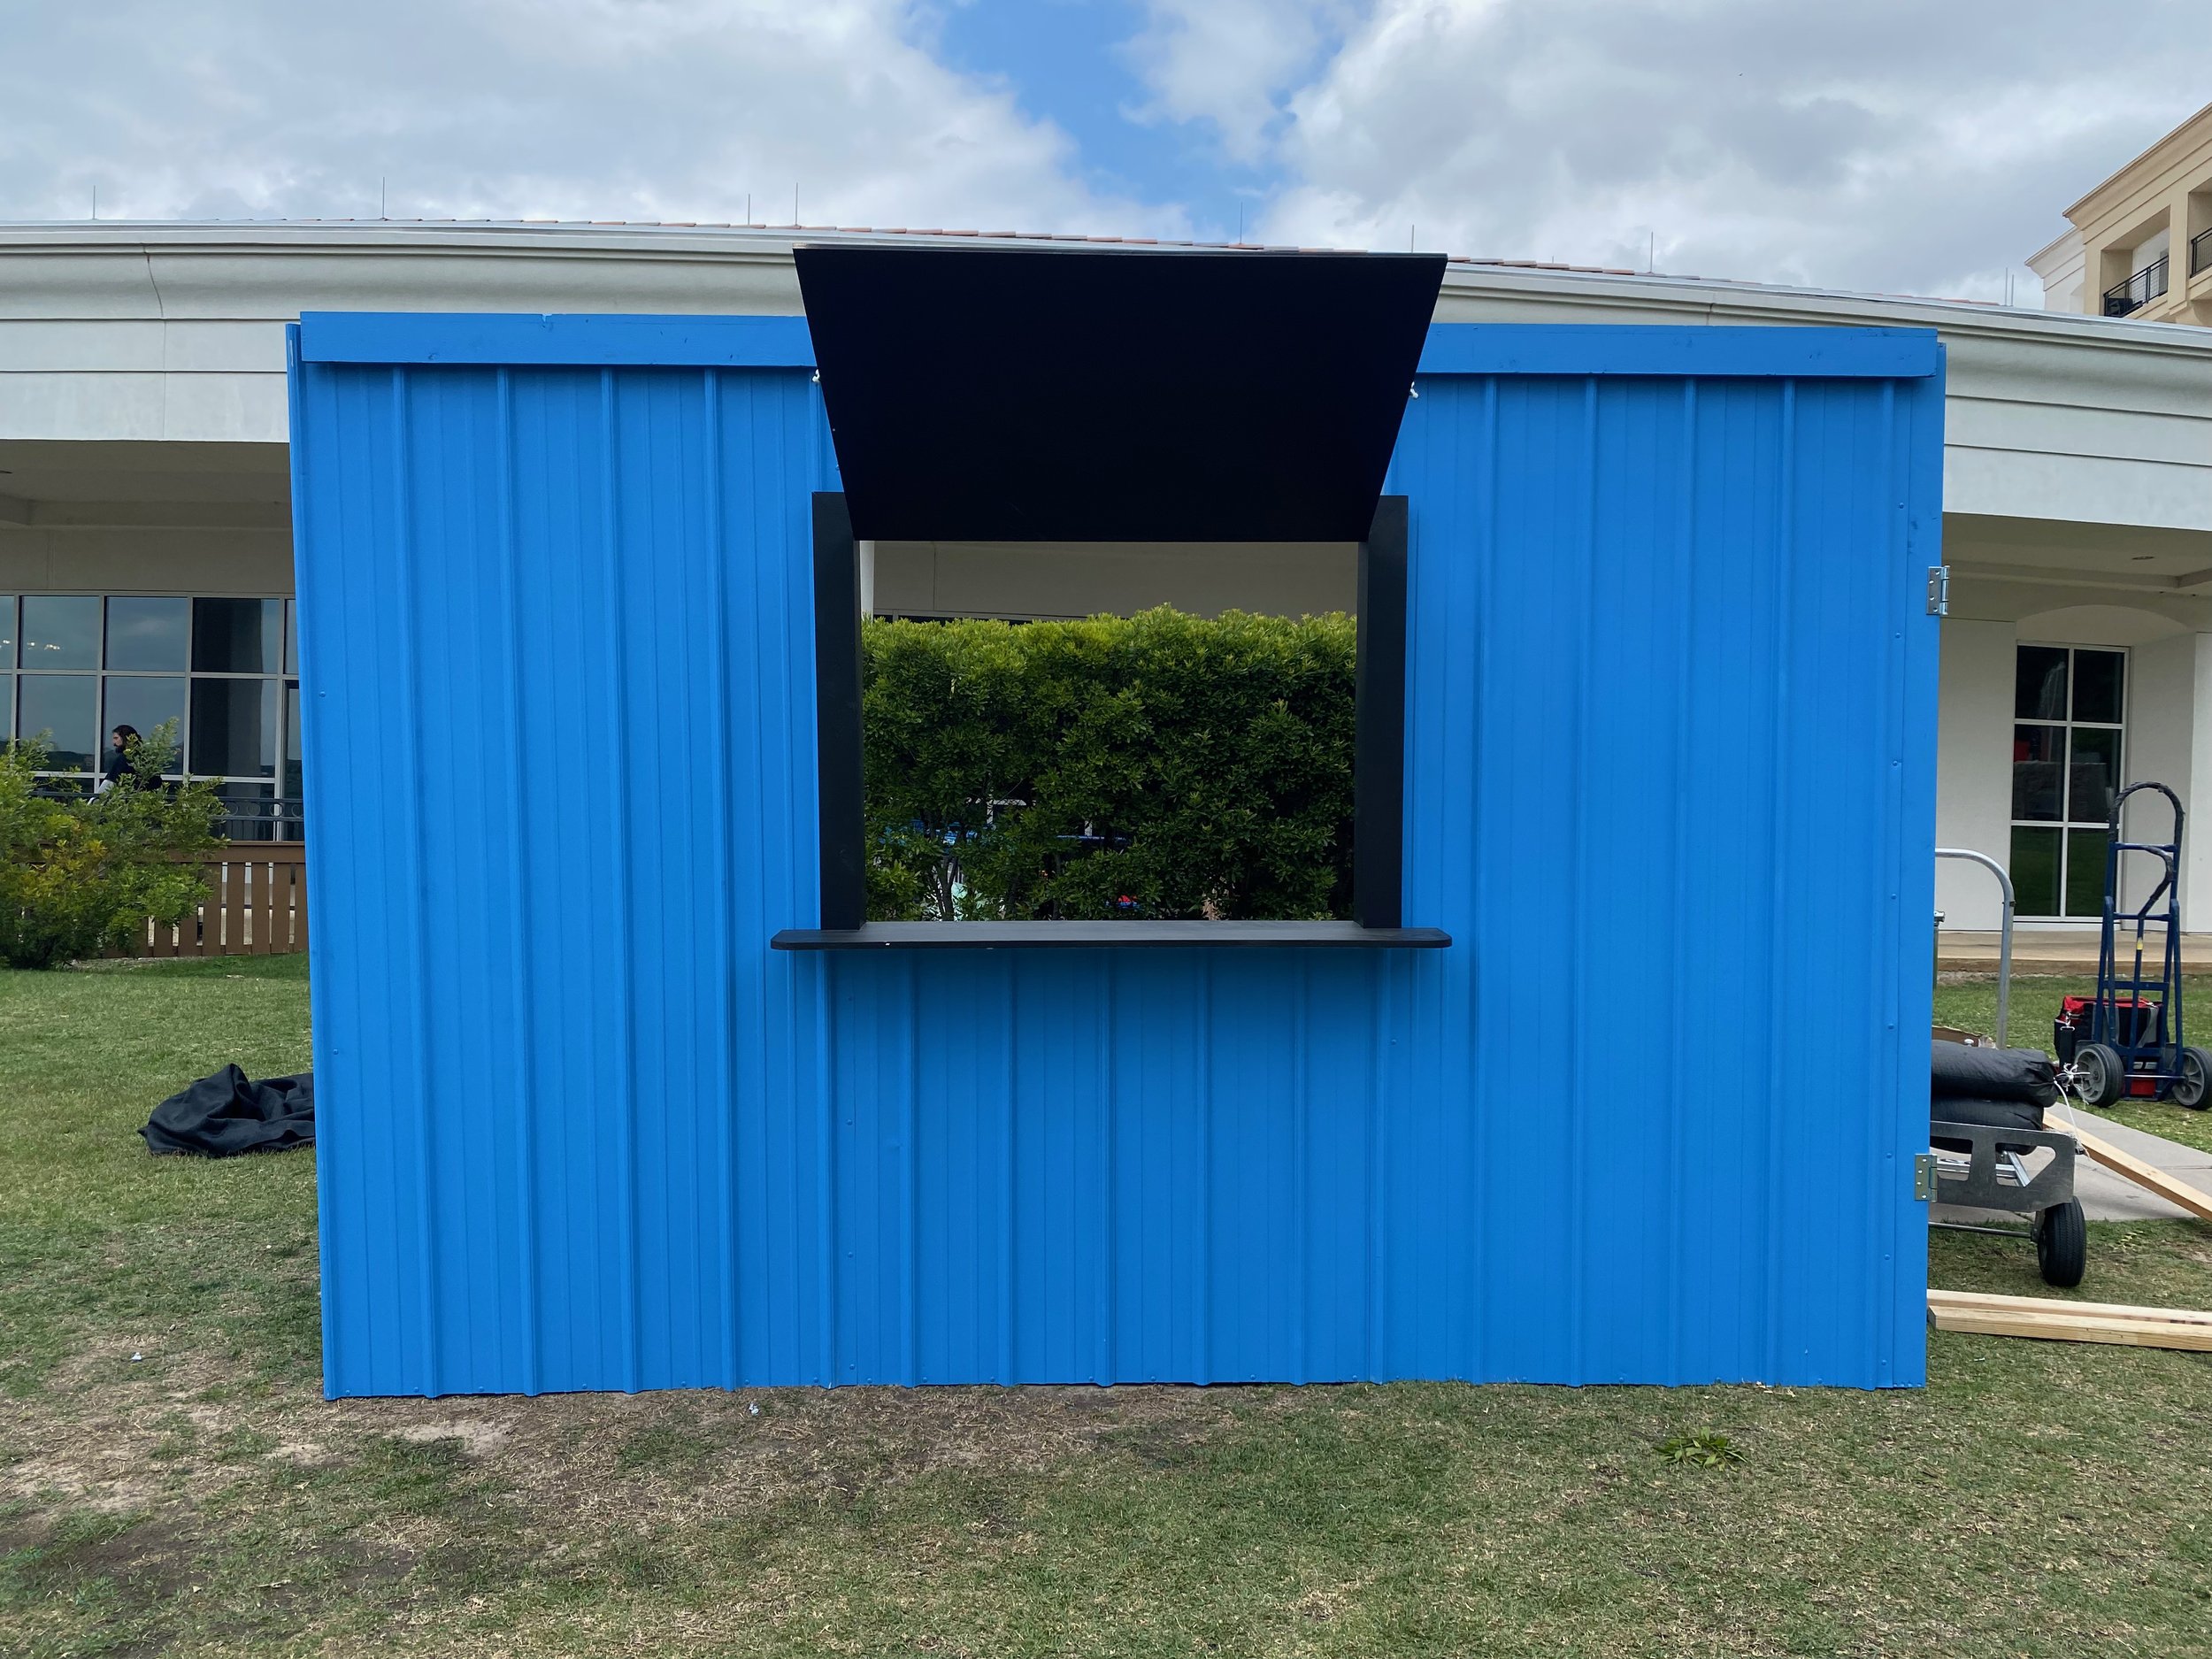 The Container bar- 8'H x 12'L x 6'D